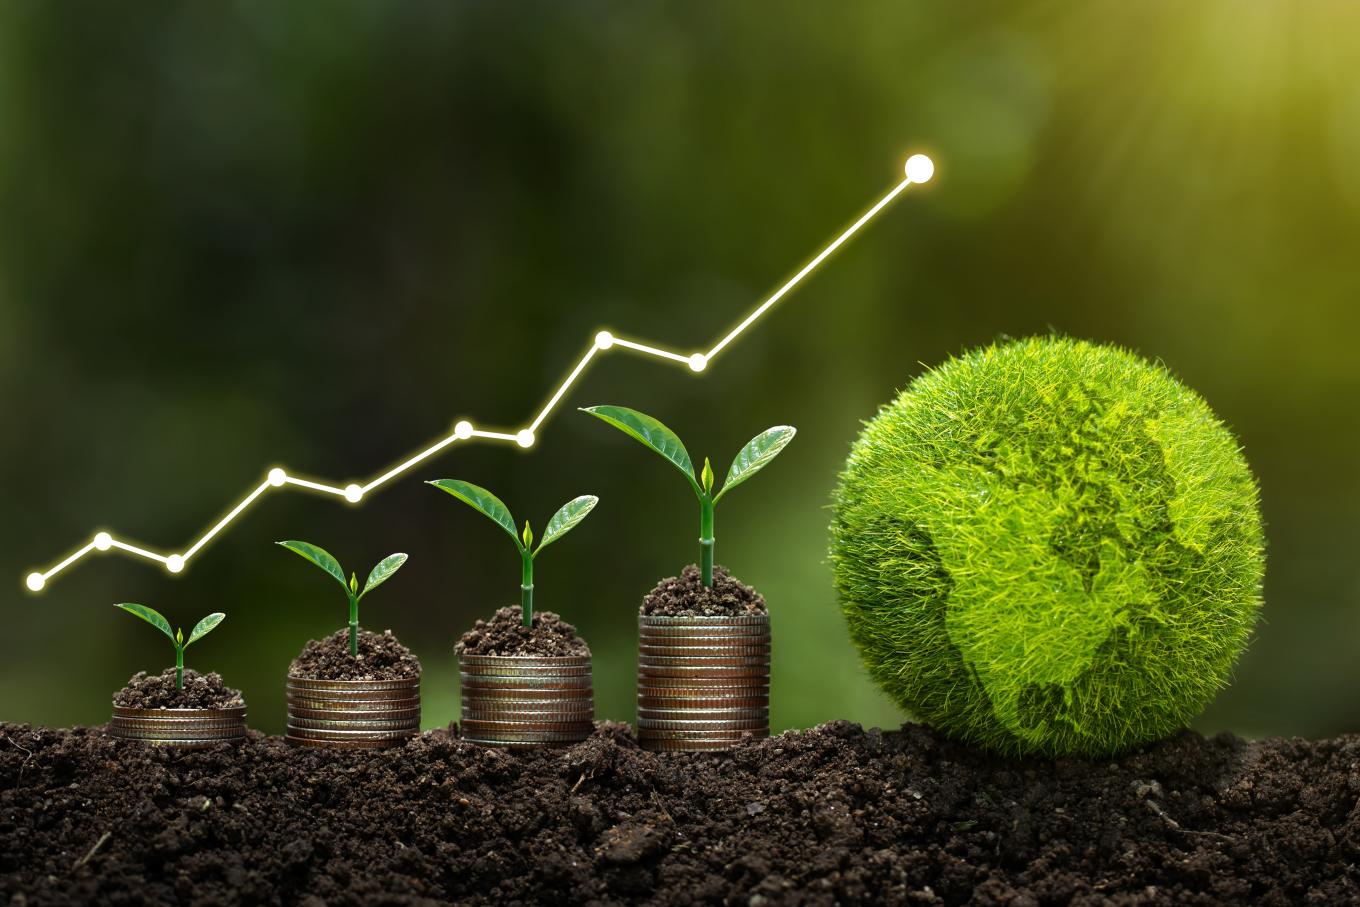 Conceptual photo of stacks of coins and green shoots growing from them into a green earth